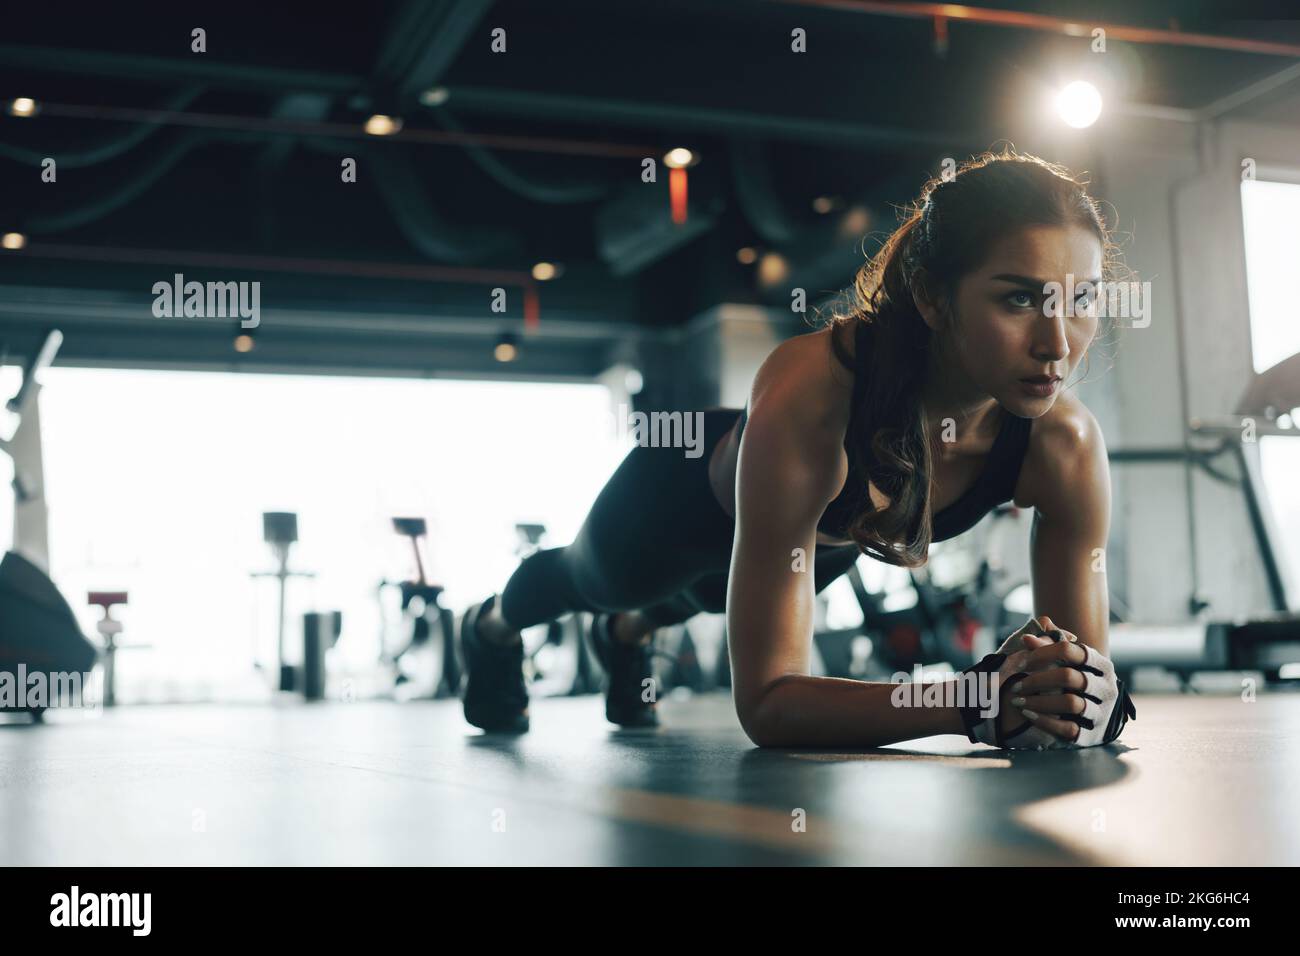 Young woman doing plank exercise while exercising in gym. Stock Photo